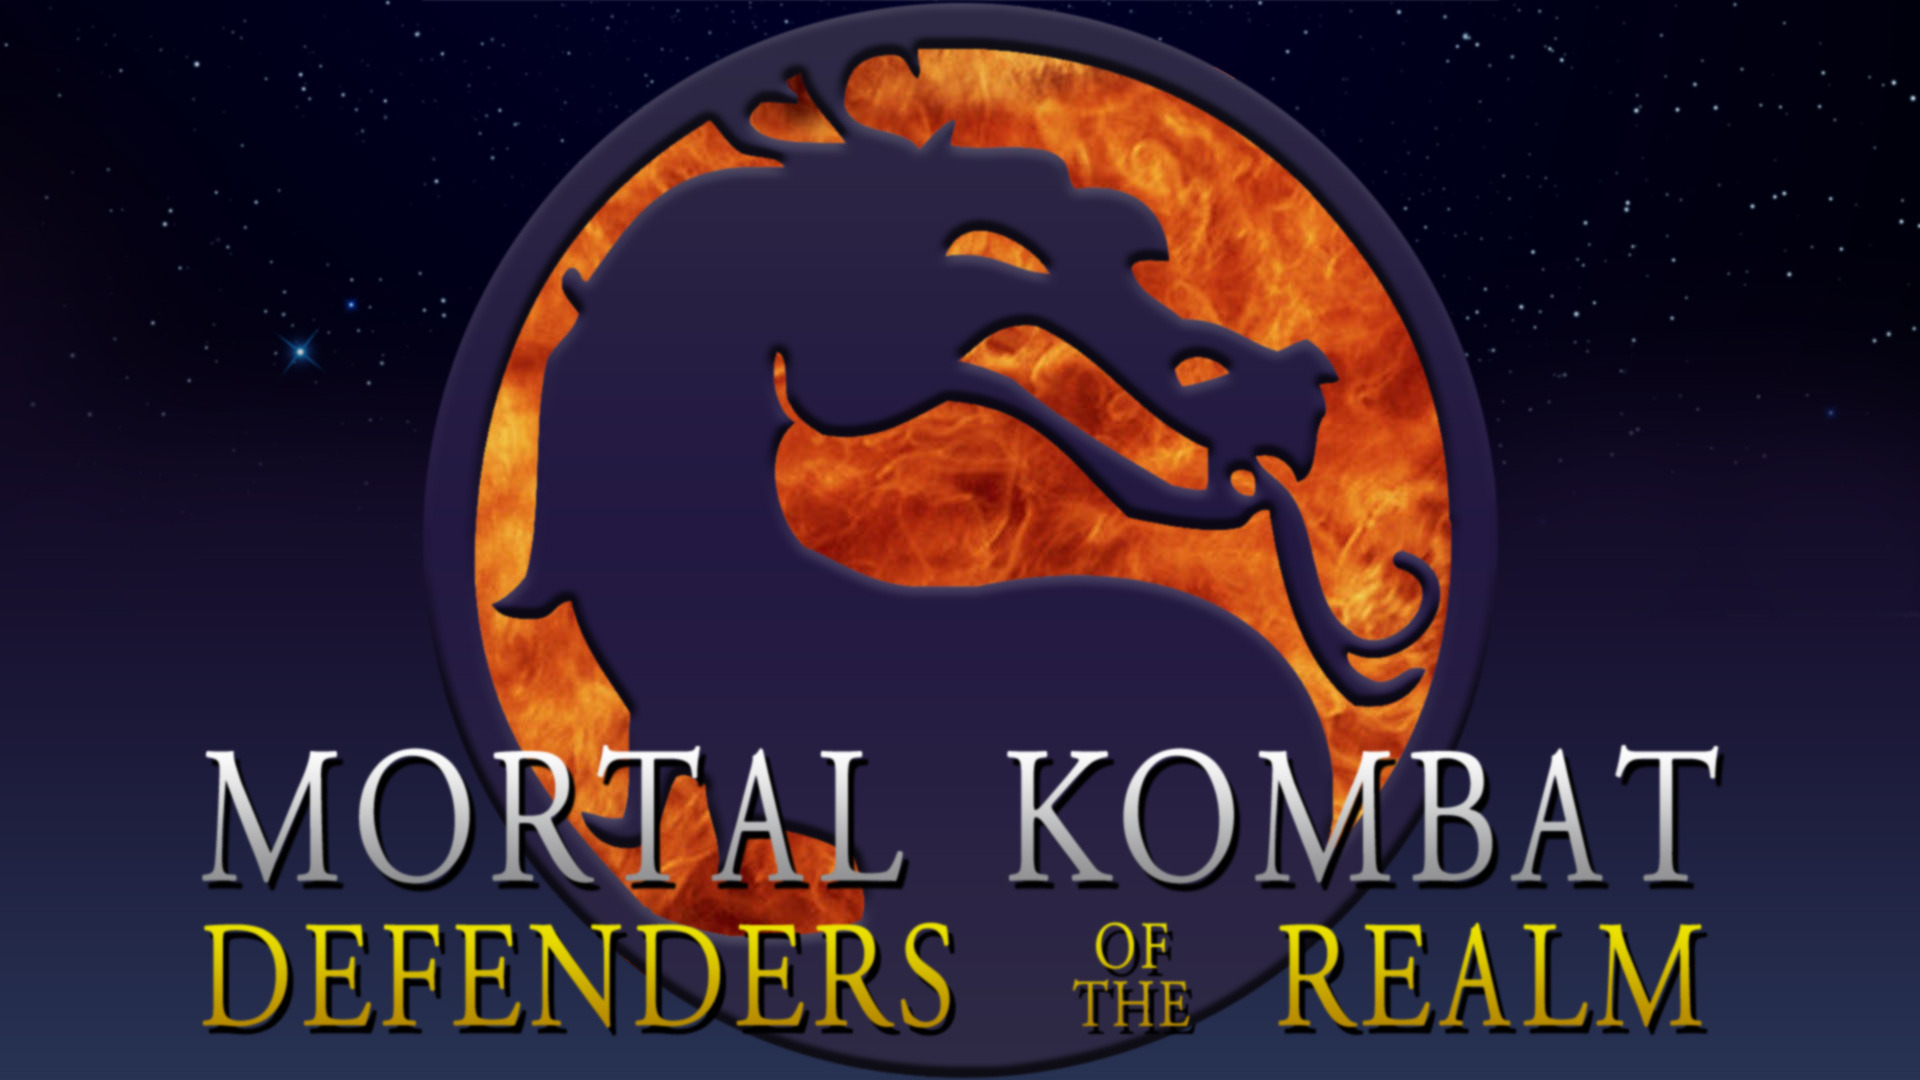 Show Mortal Kombat: Defenders of the Realm